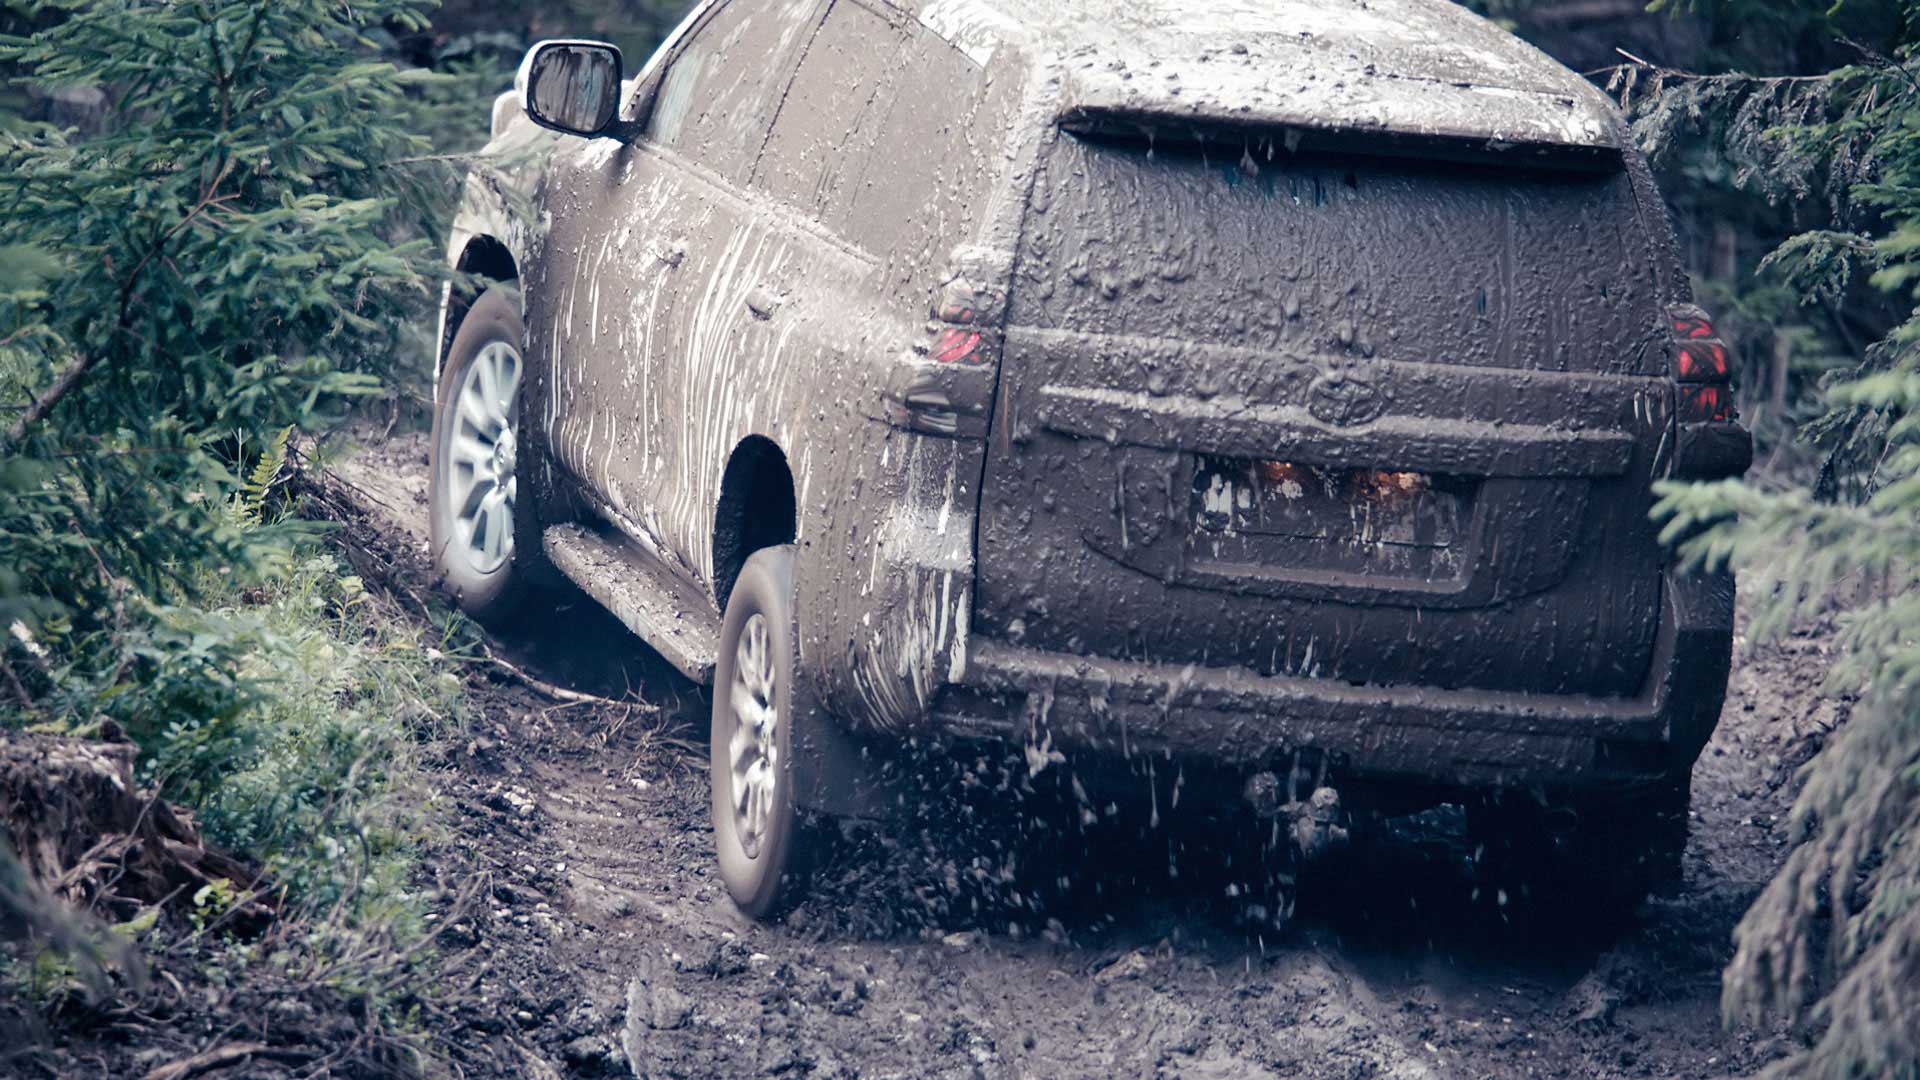 Covered with dirt. Still from Toyota Landcruiser.